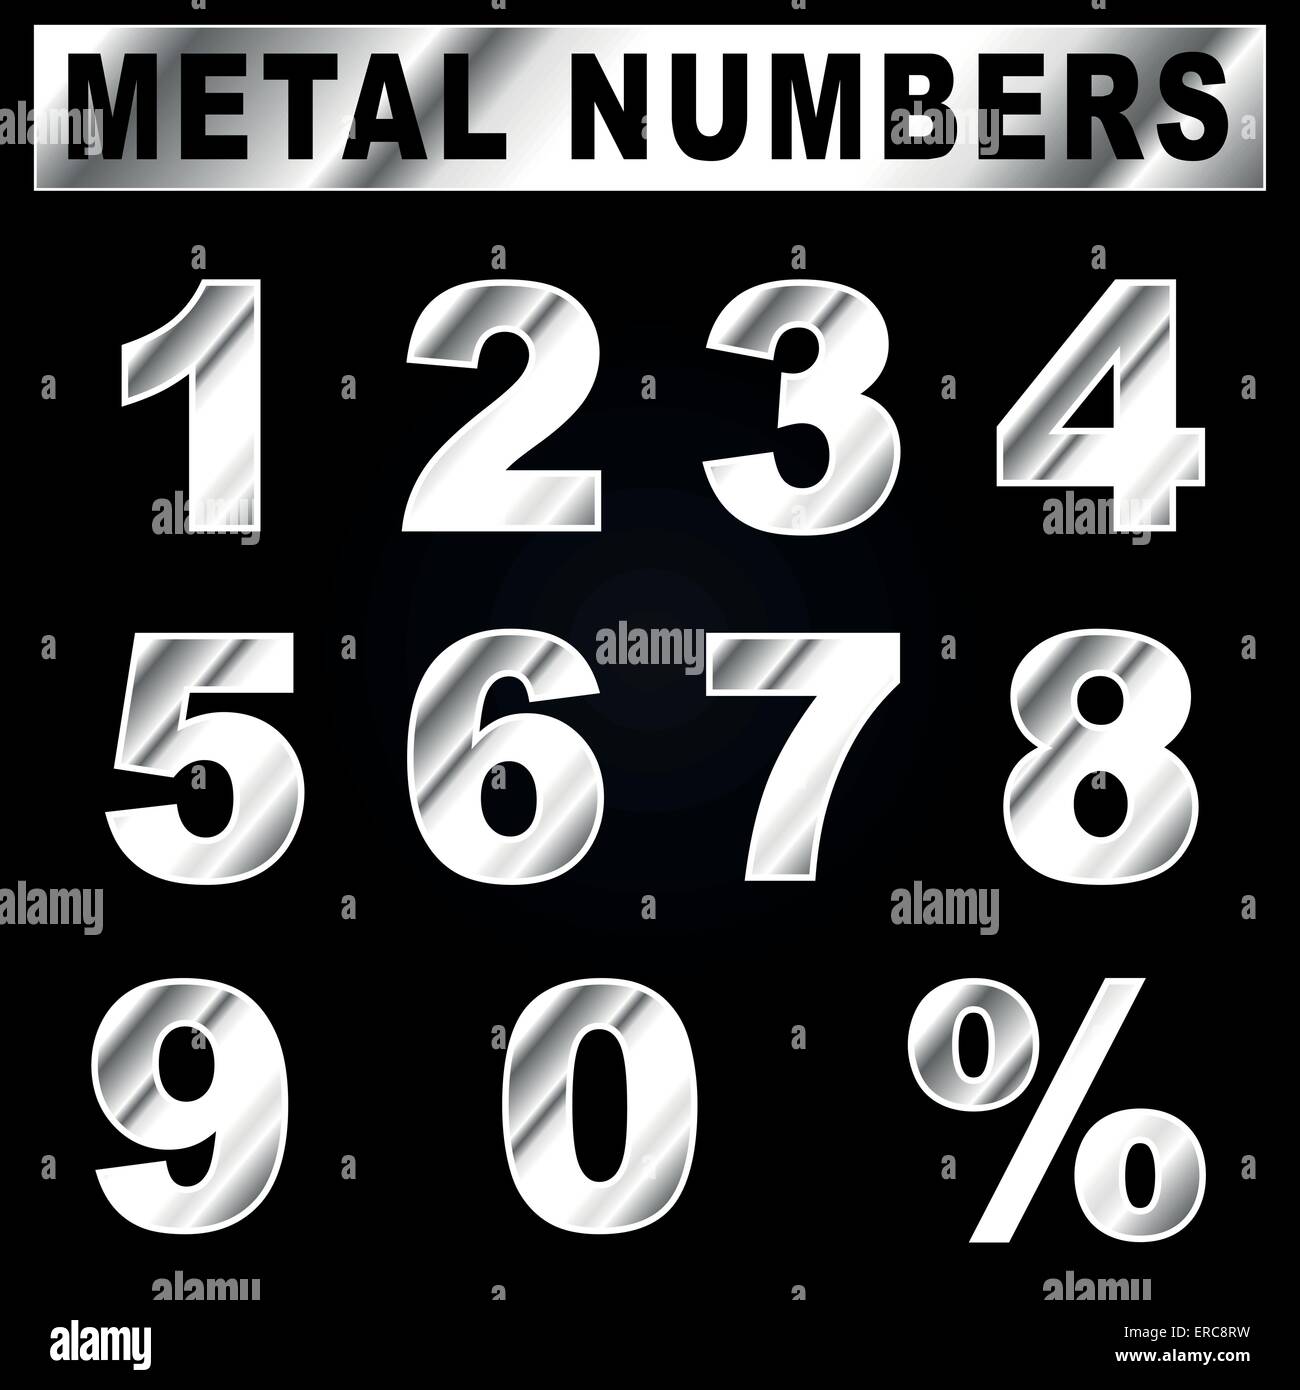 Vector illustration of metal numbers set on black background Stock Vector